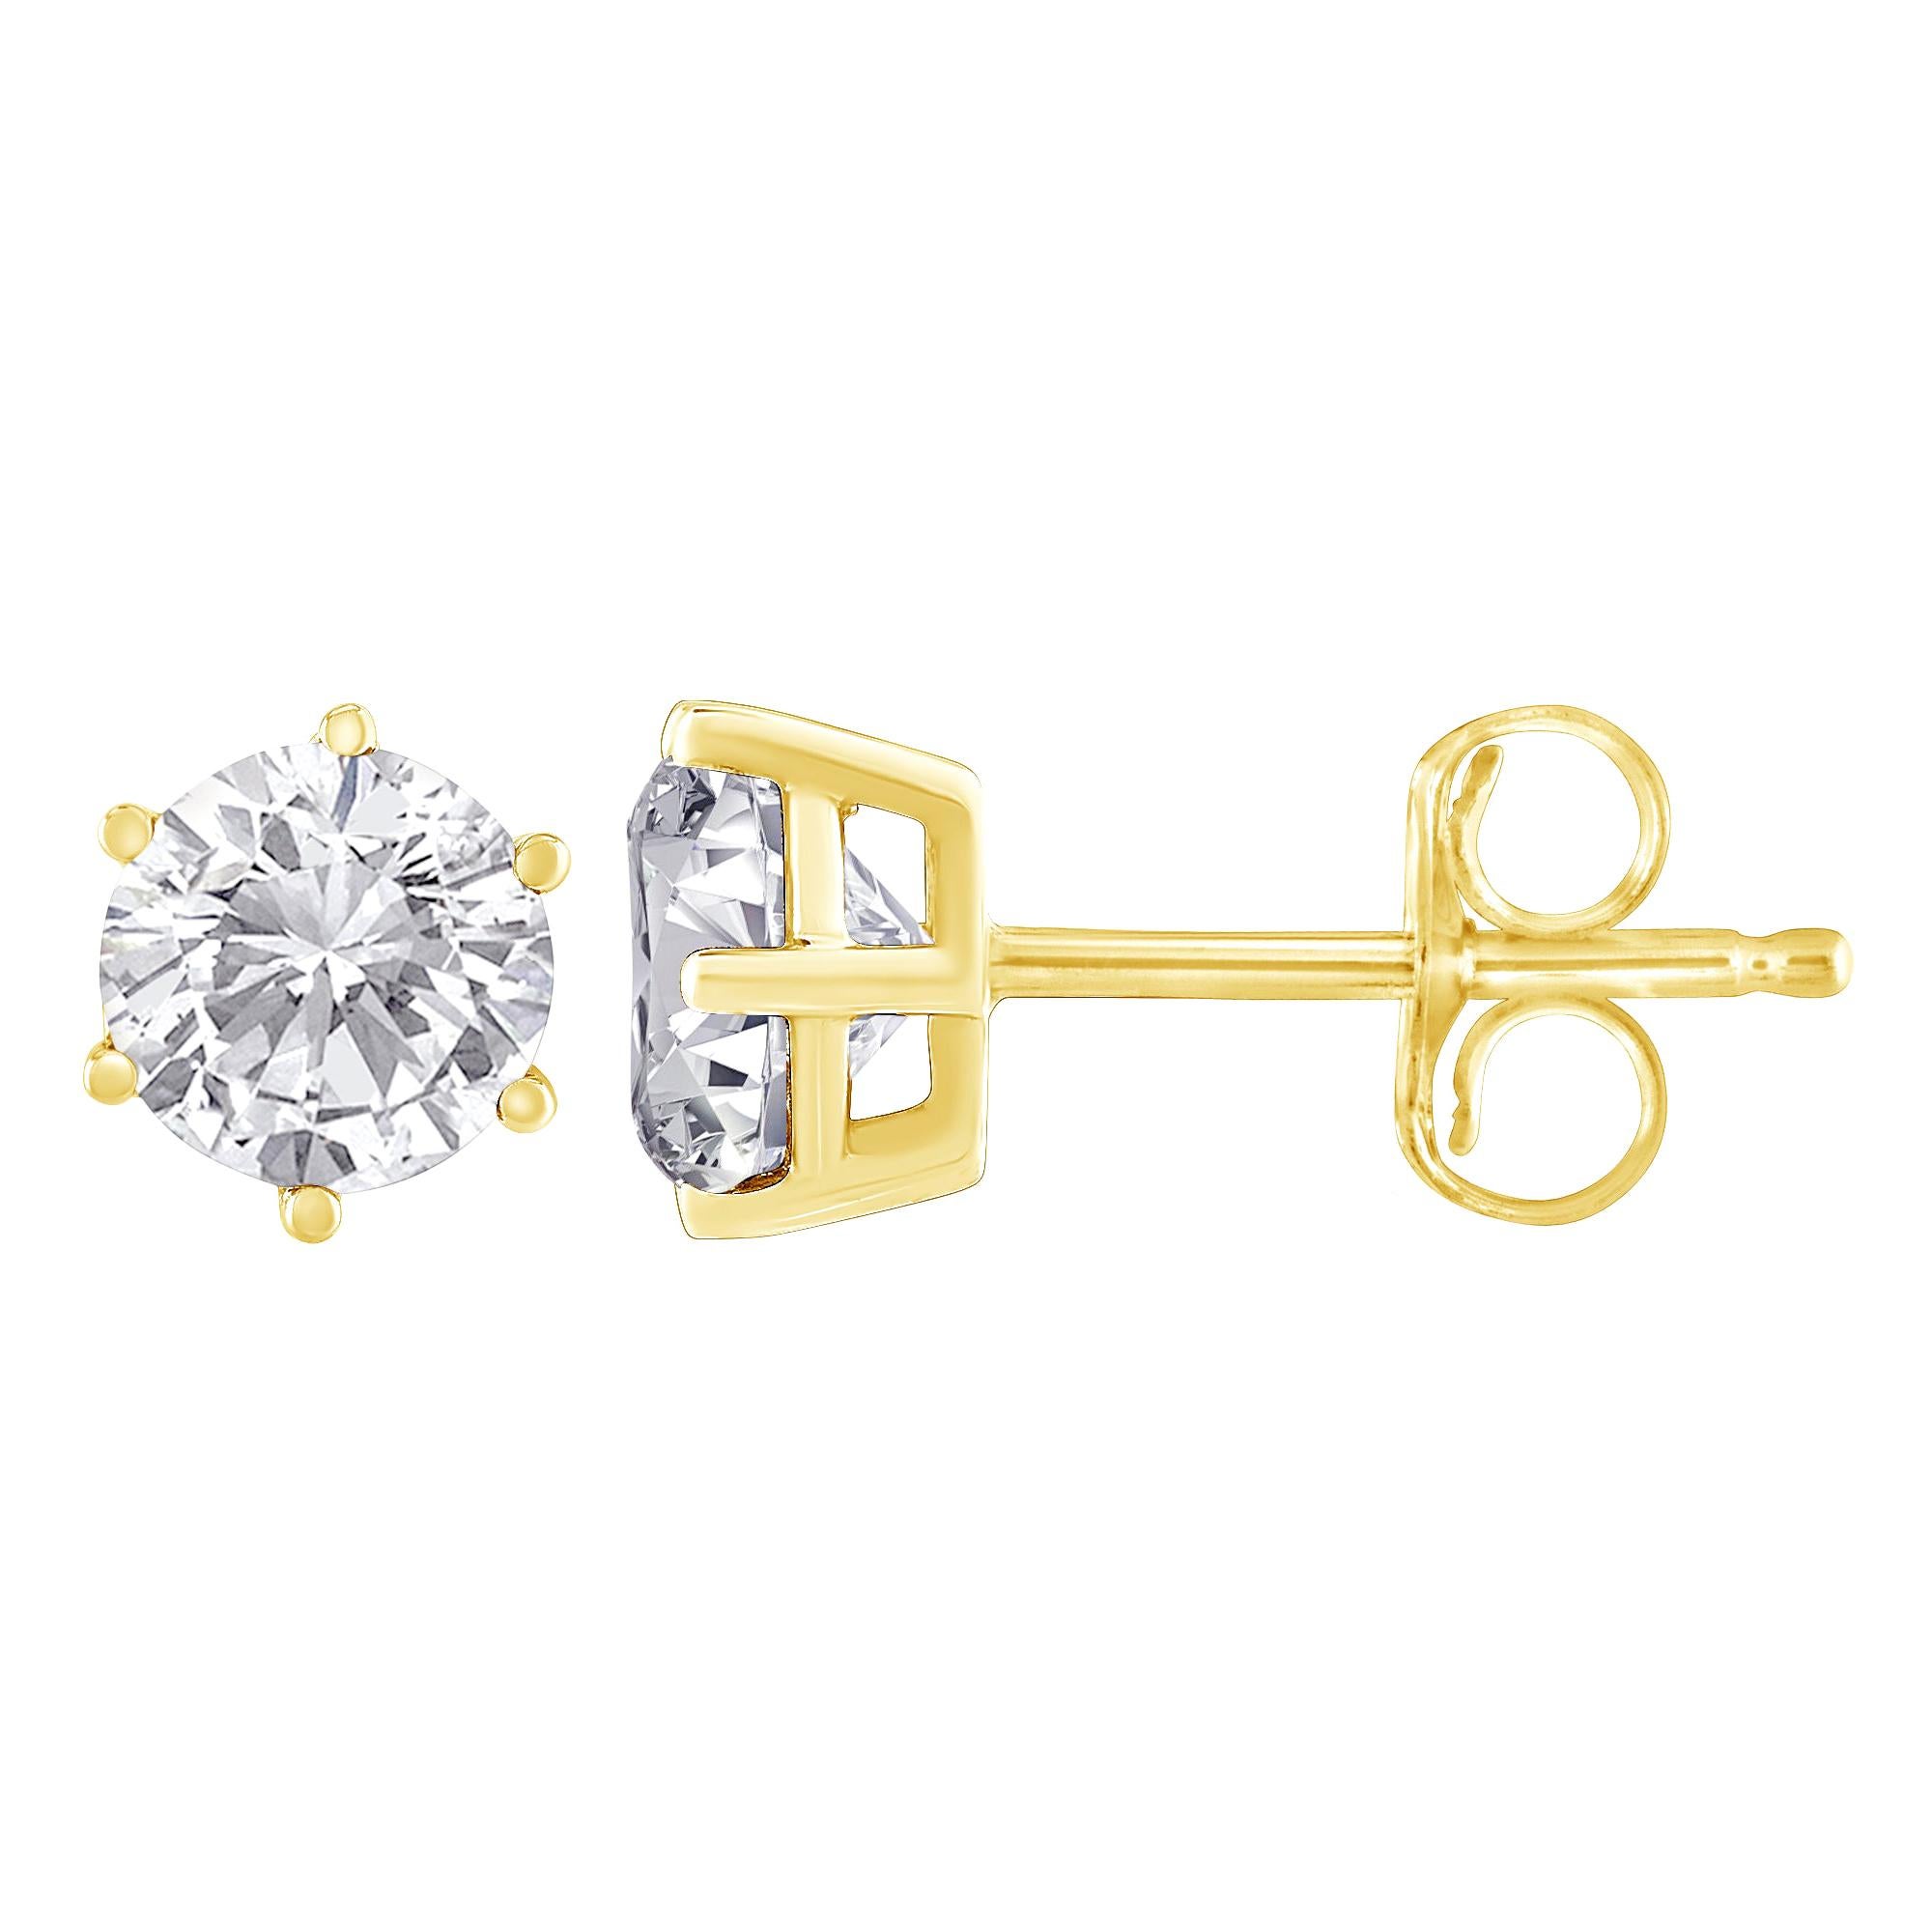 18K Yellow Gold 1 1/2 Carat Diamond Solitaire Stud Earrings For Sale